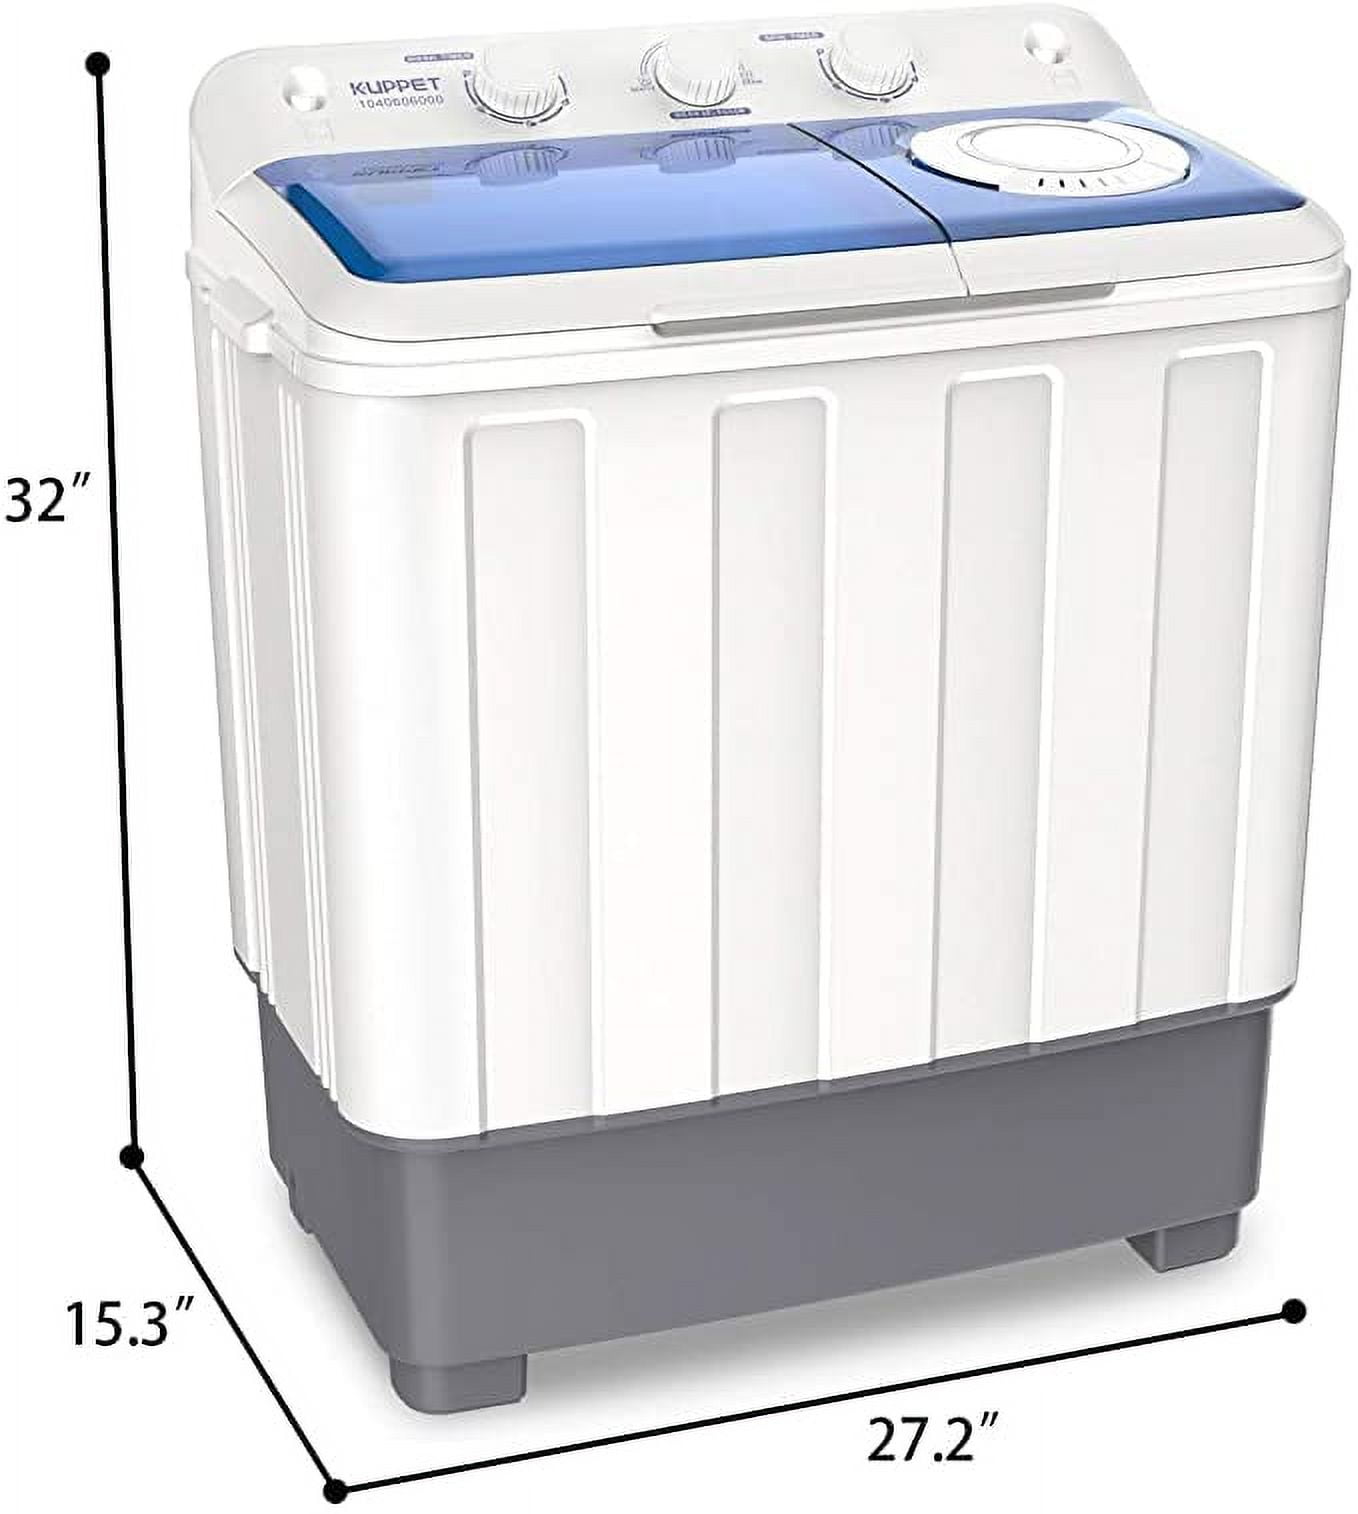 Kuppet Compact Washer Review UPDATE - DO NOT BUY! Update to